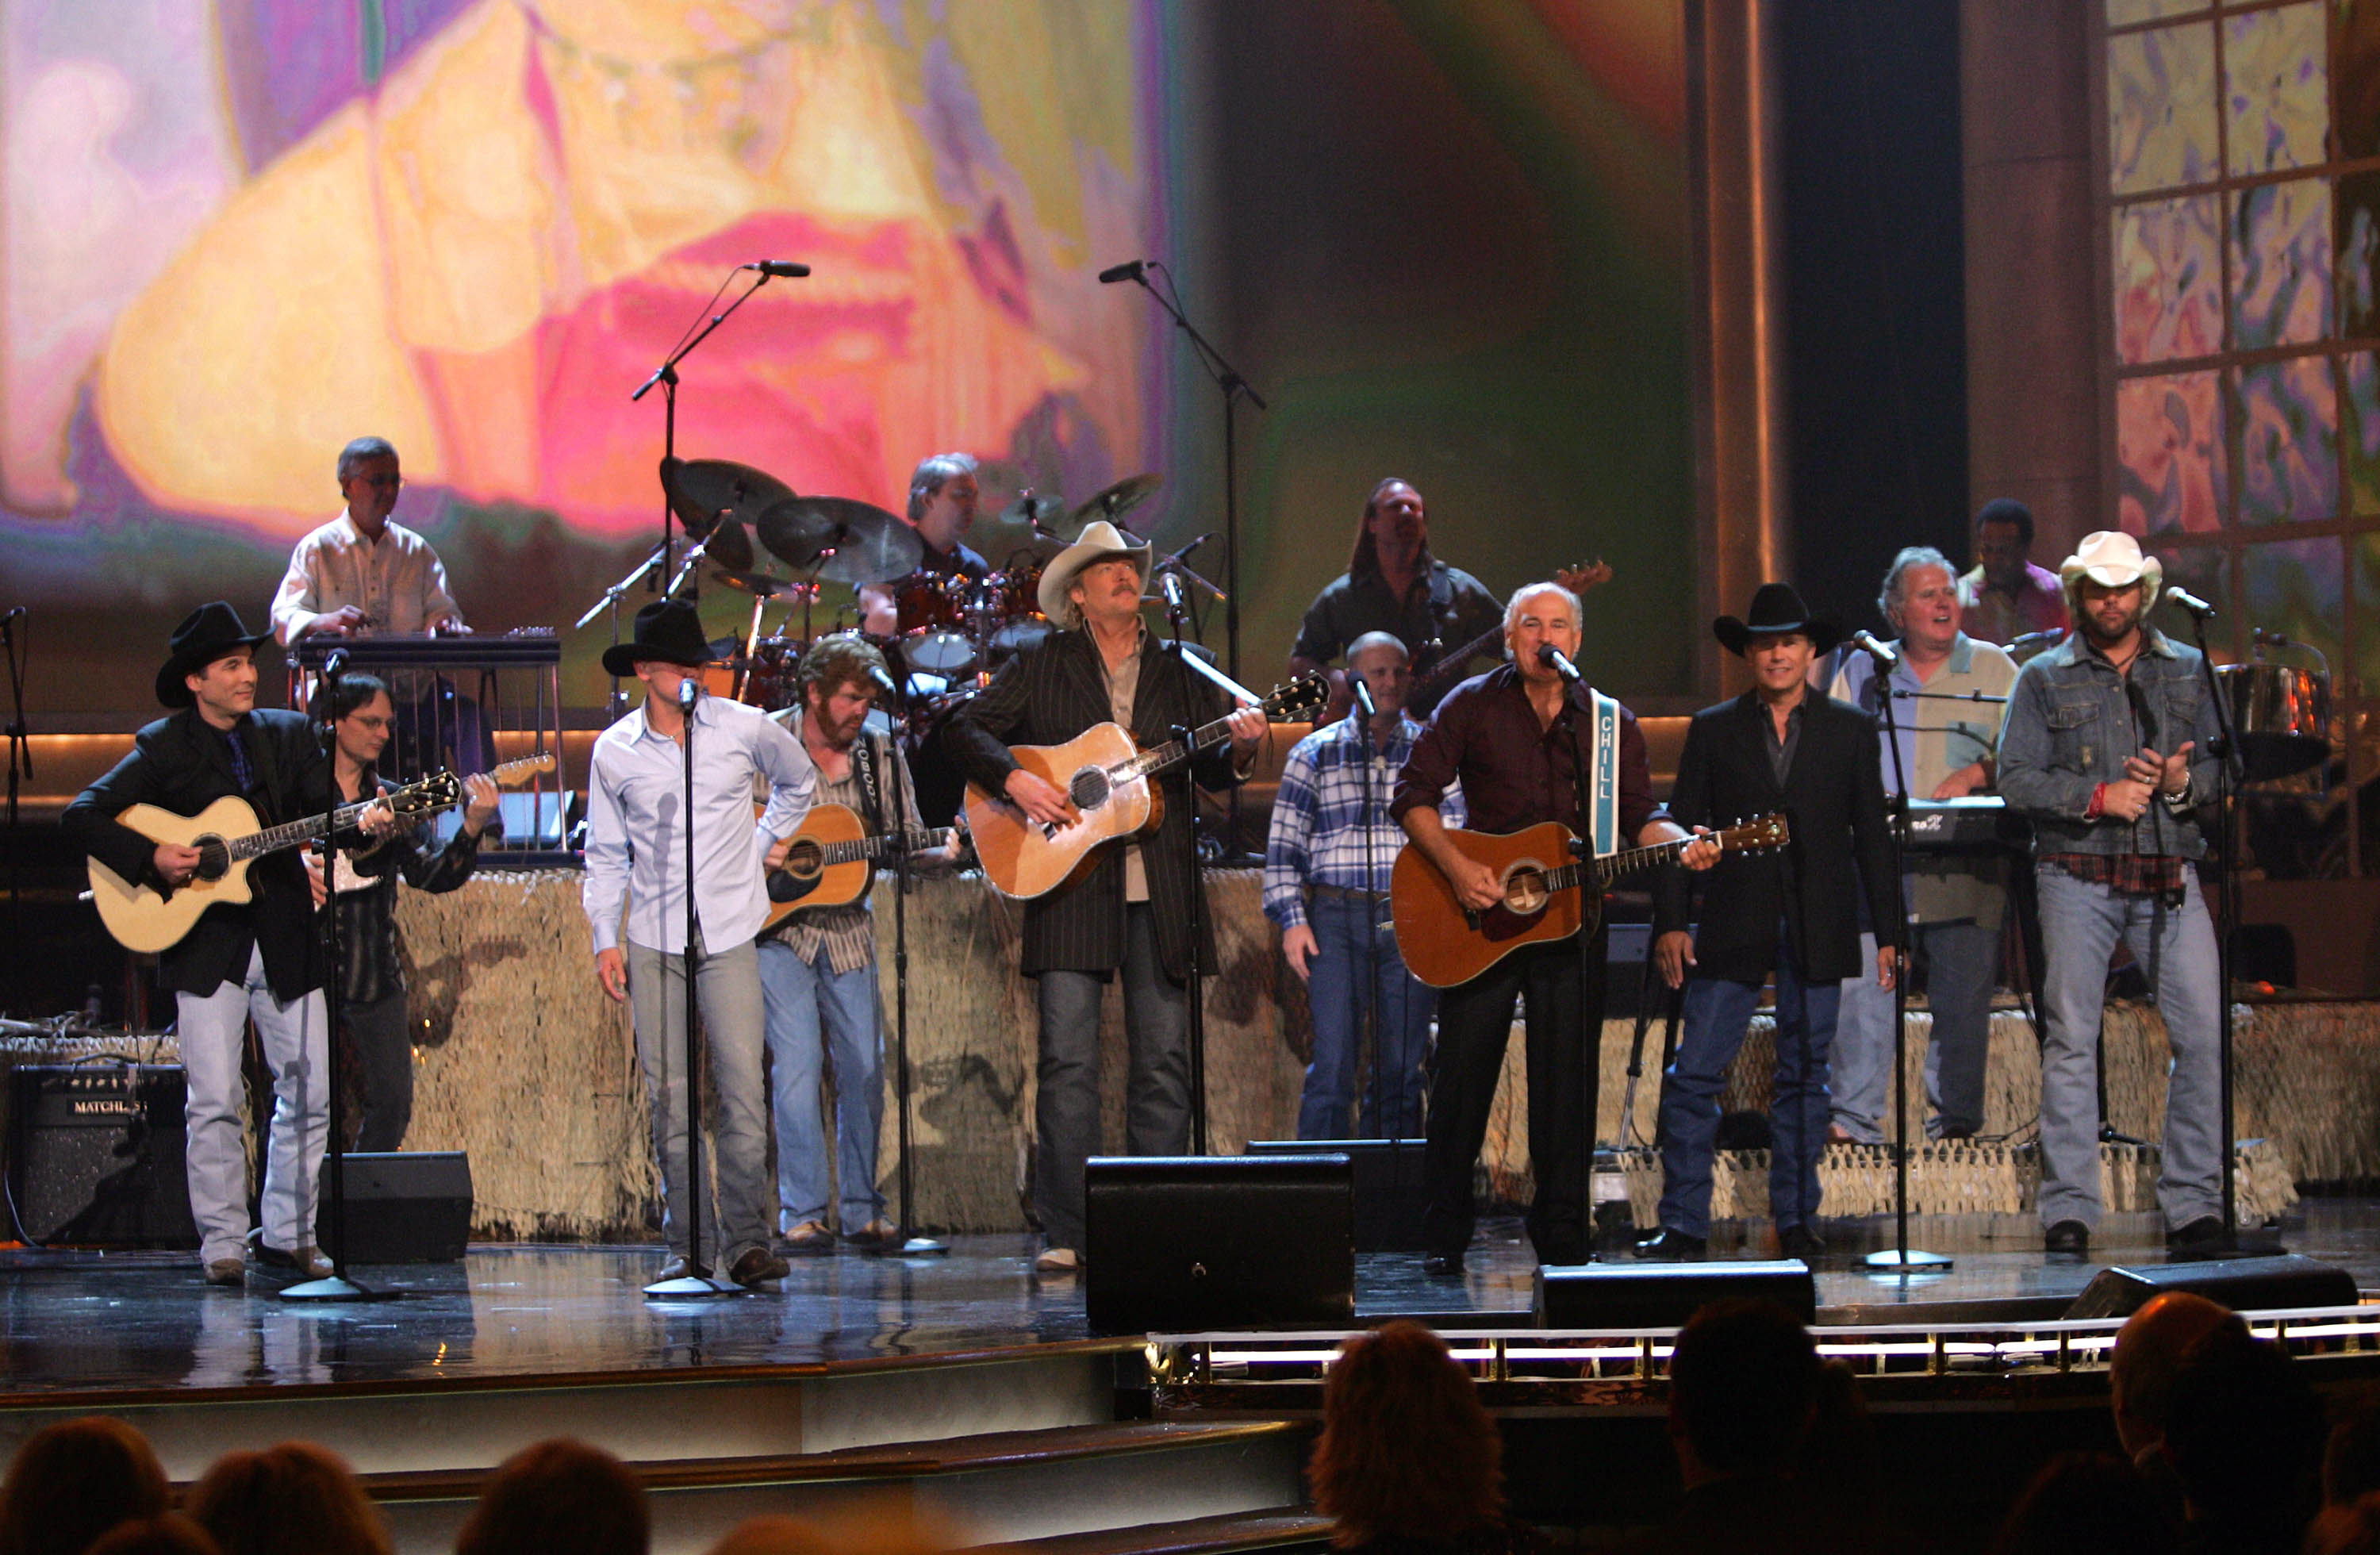 NASHVILLE, TN - NOVEMBER 9: (L-R) Clint Black, Kenny Chesney, Alan Jackson, Jimmy Buffett, George Strait and Toby Keith perform on stage at the 38th Annual CMA Awards at the Grand Ole Opry House November 9, 2004 in Nashville, Tennessee.